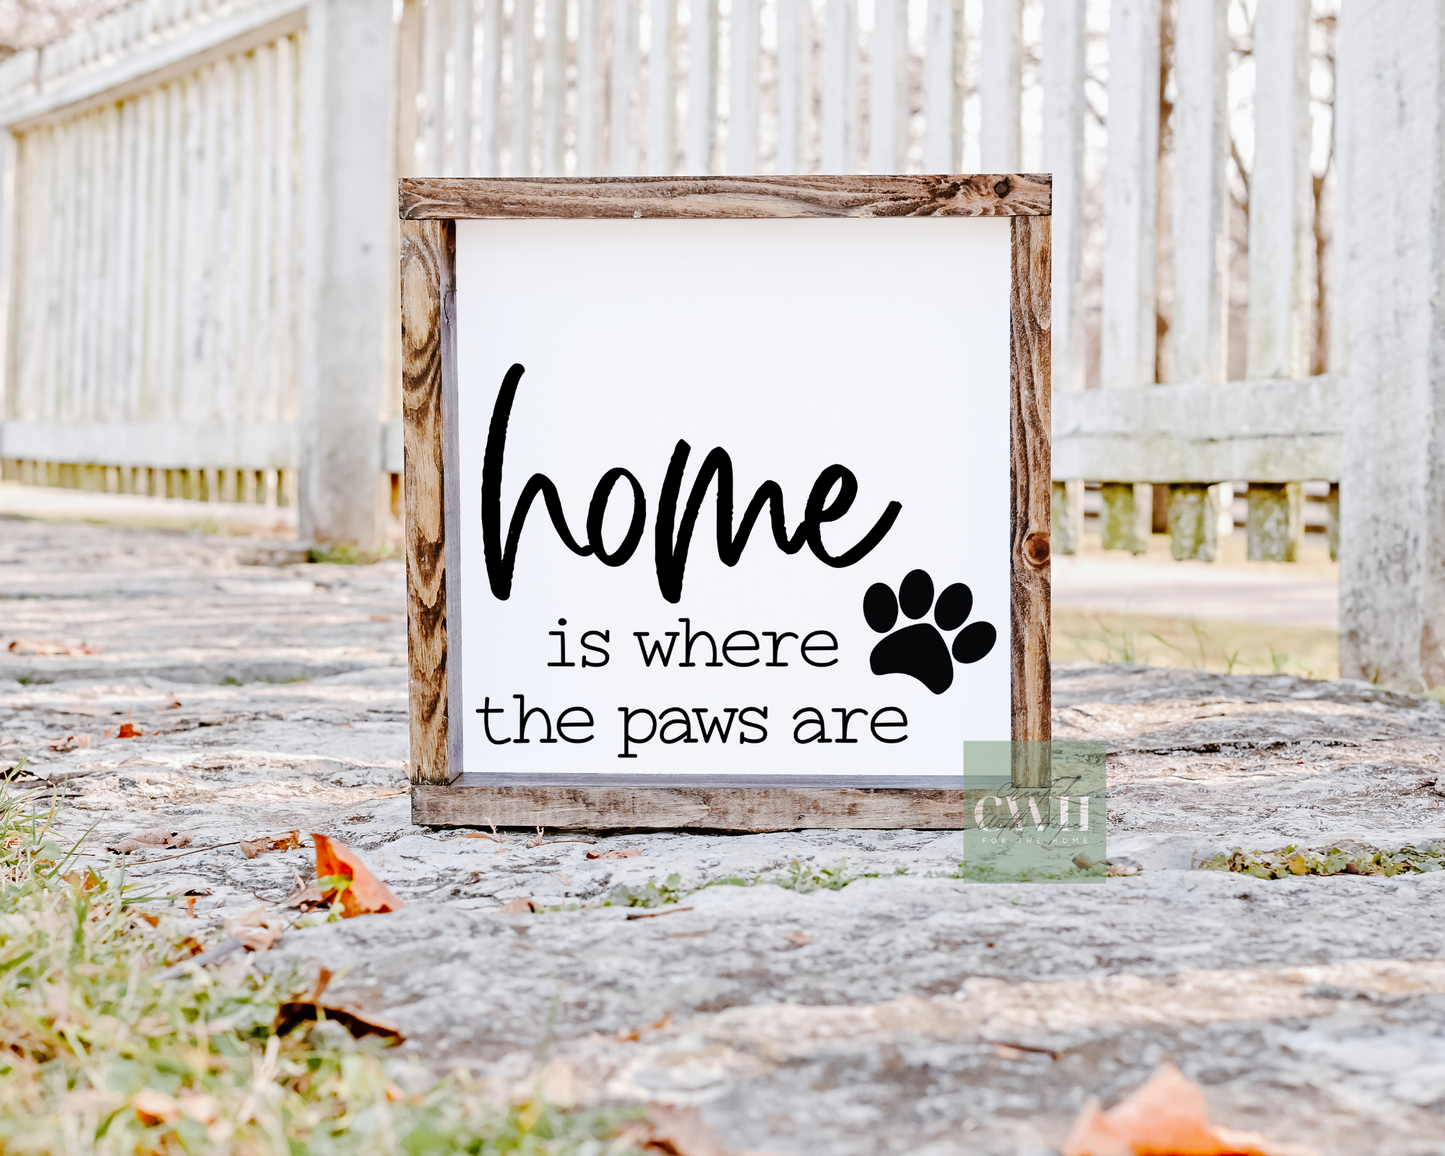 home is where the paws are